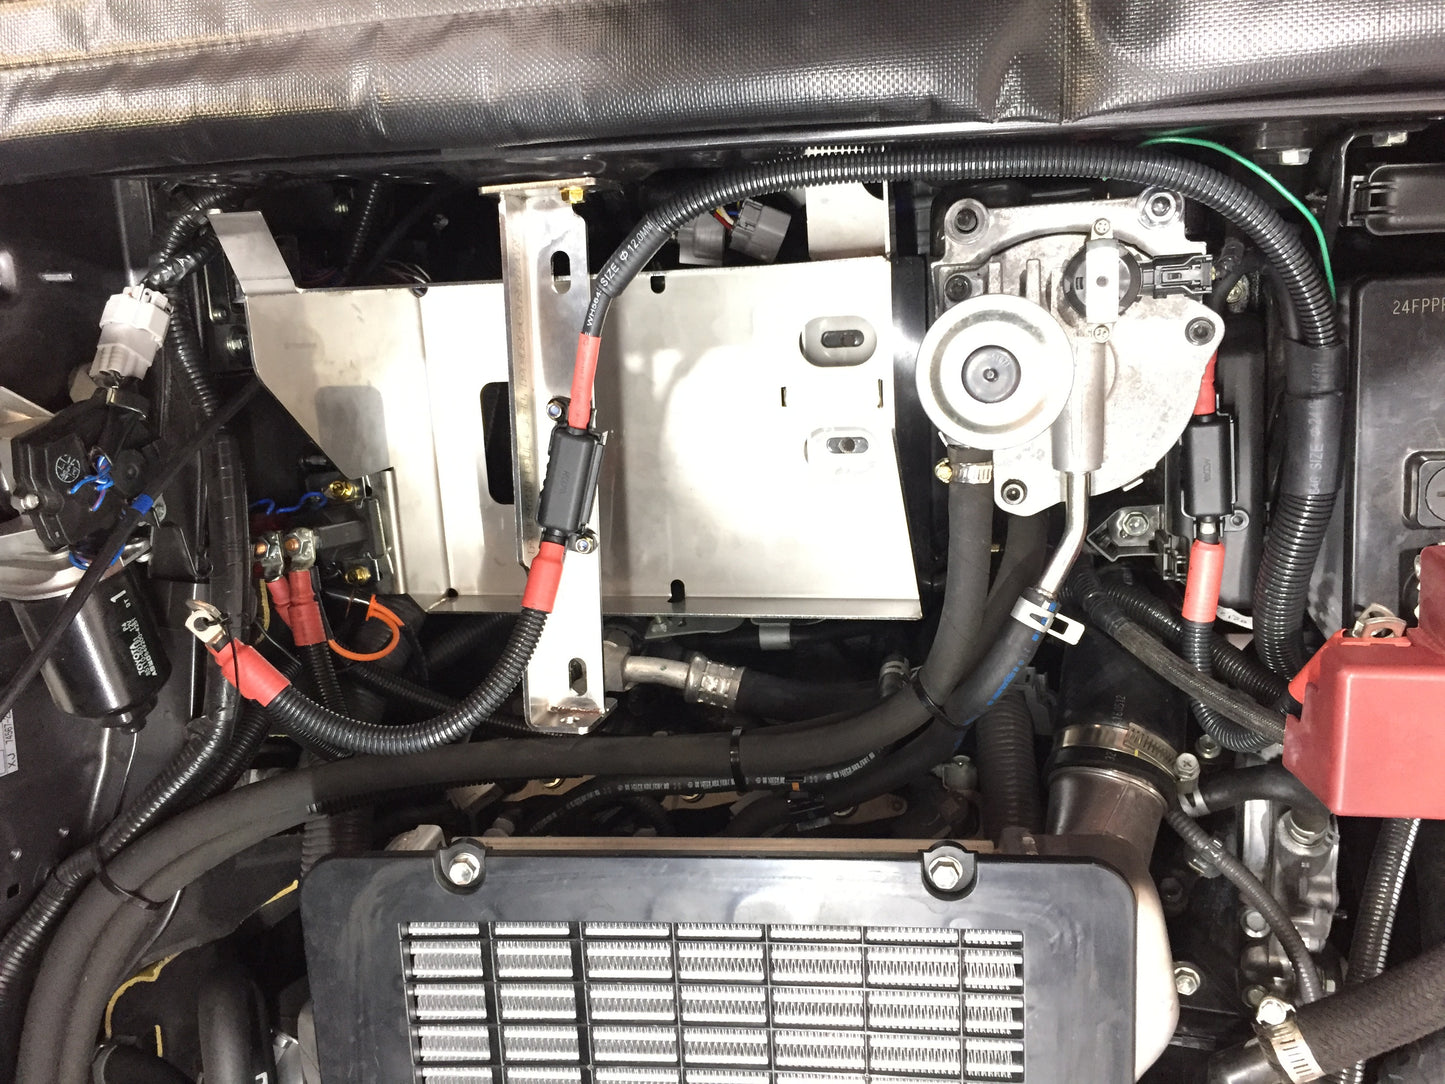 PDP BATTERY TRAY/DUAL BATTERY SETUP PERTH DIESEL PERFORMANCE